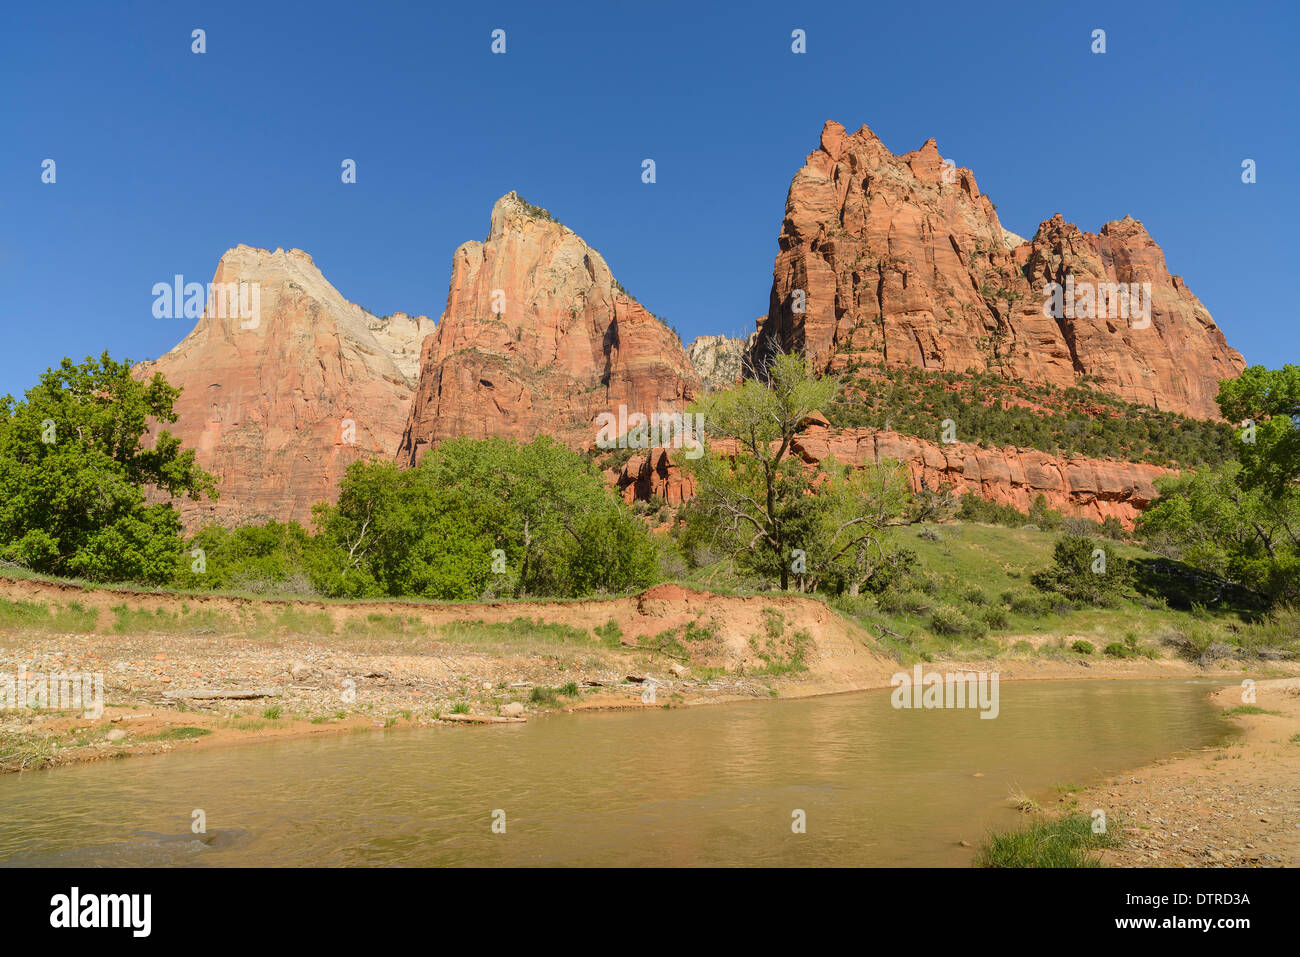 Court of the Patriarchs, Zion National Park, Utah, USA Stock Photo